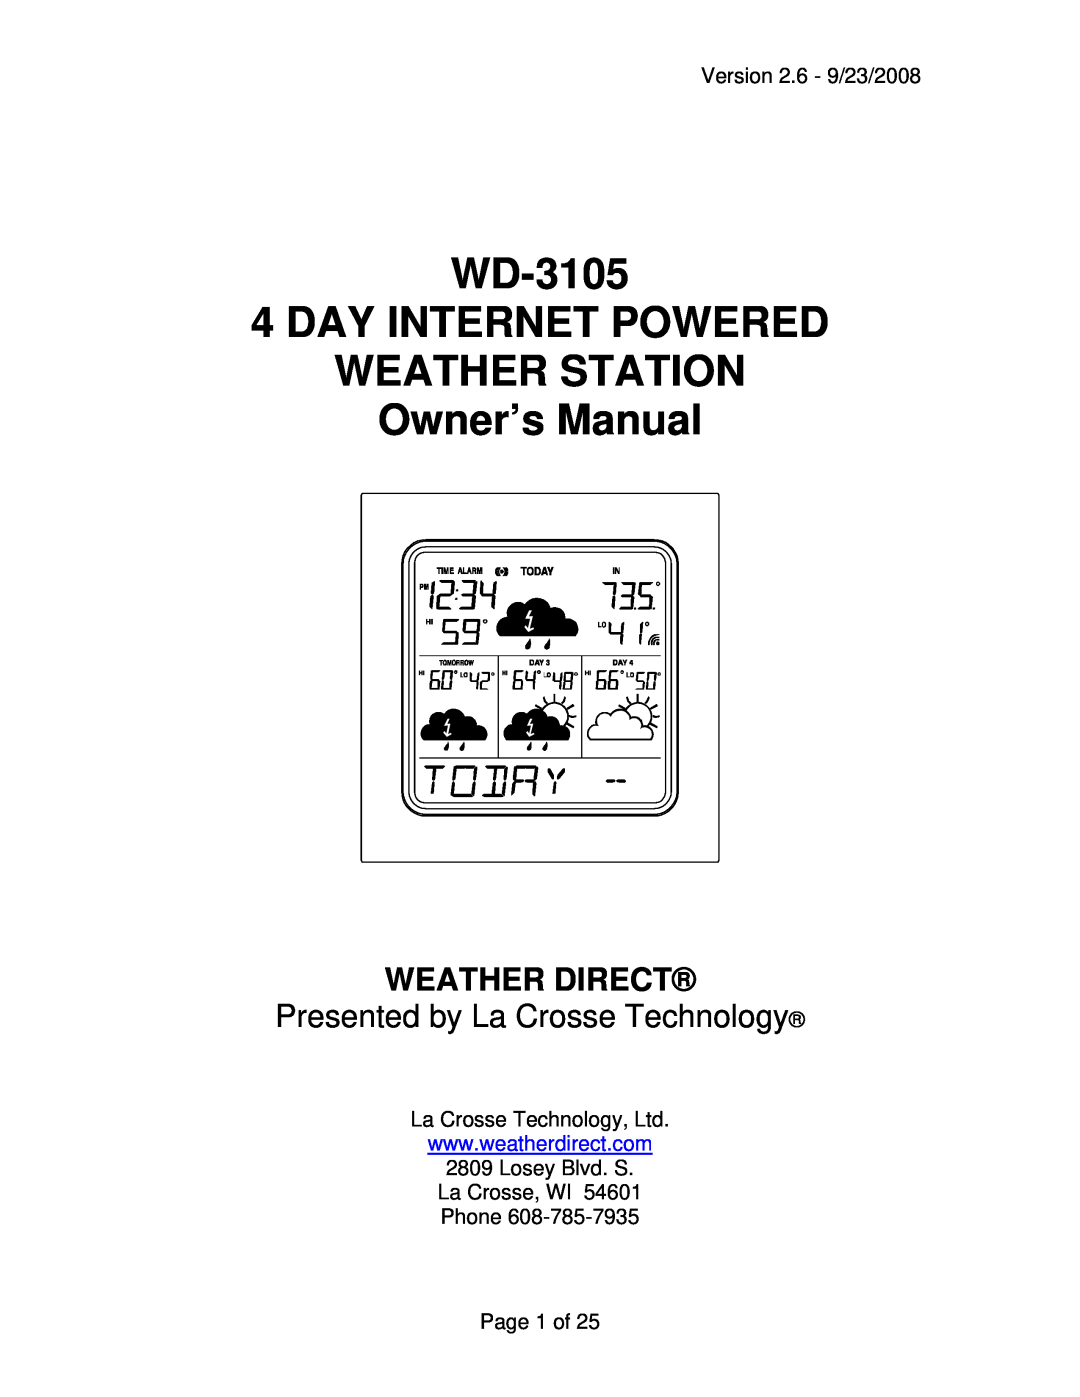 La Crosse Technology owner manual WD-3105 4 Day Wireless Weather Forecaster, Weather Direct 